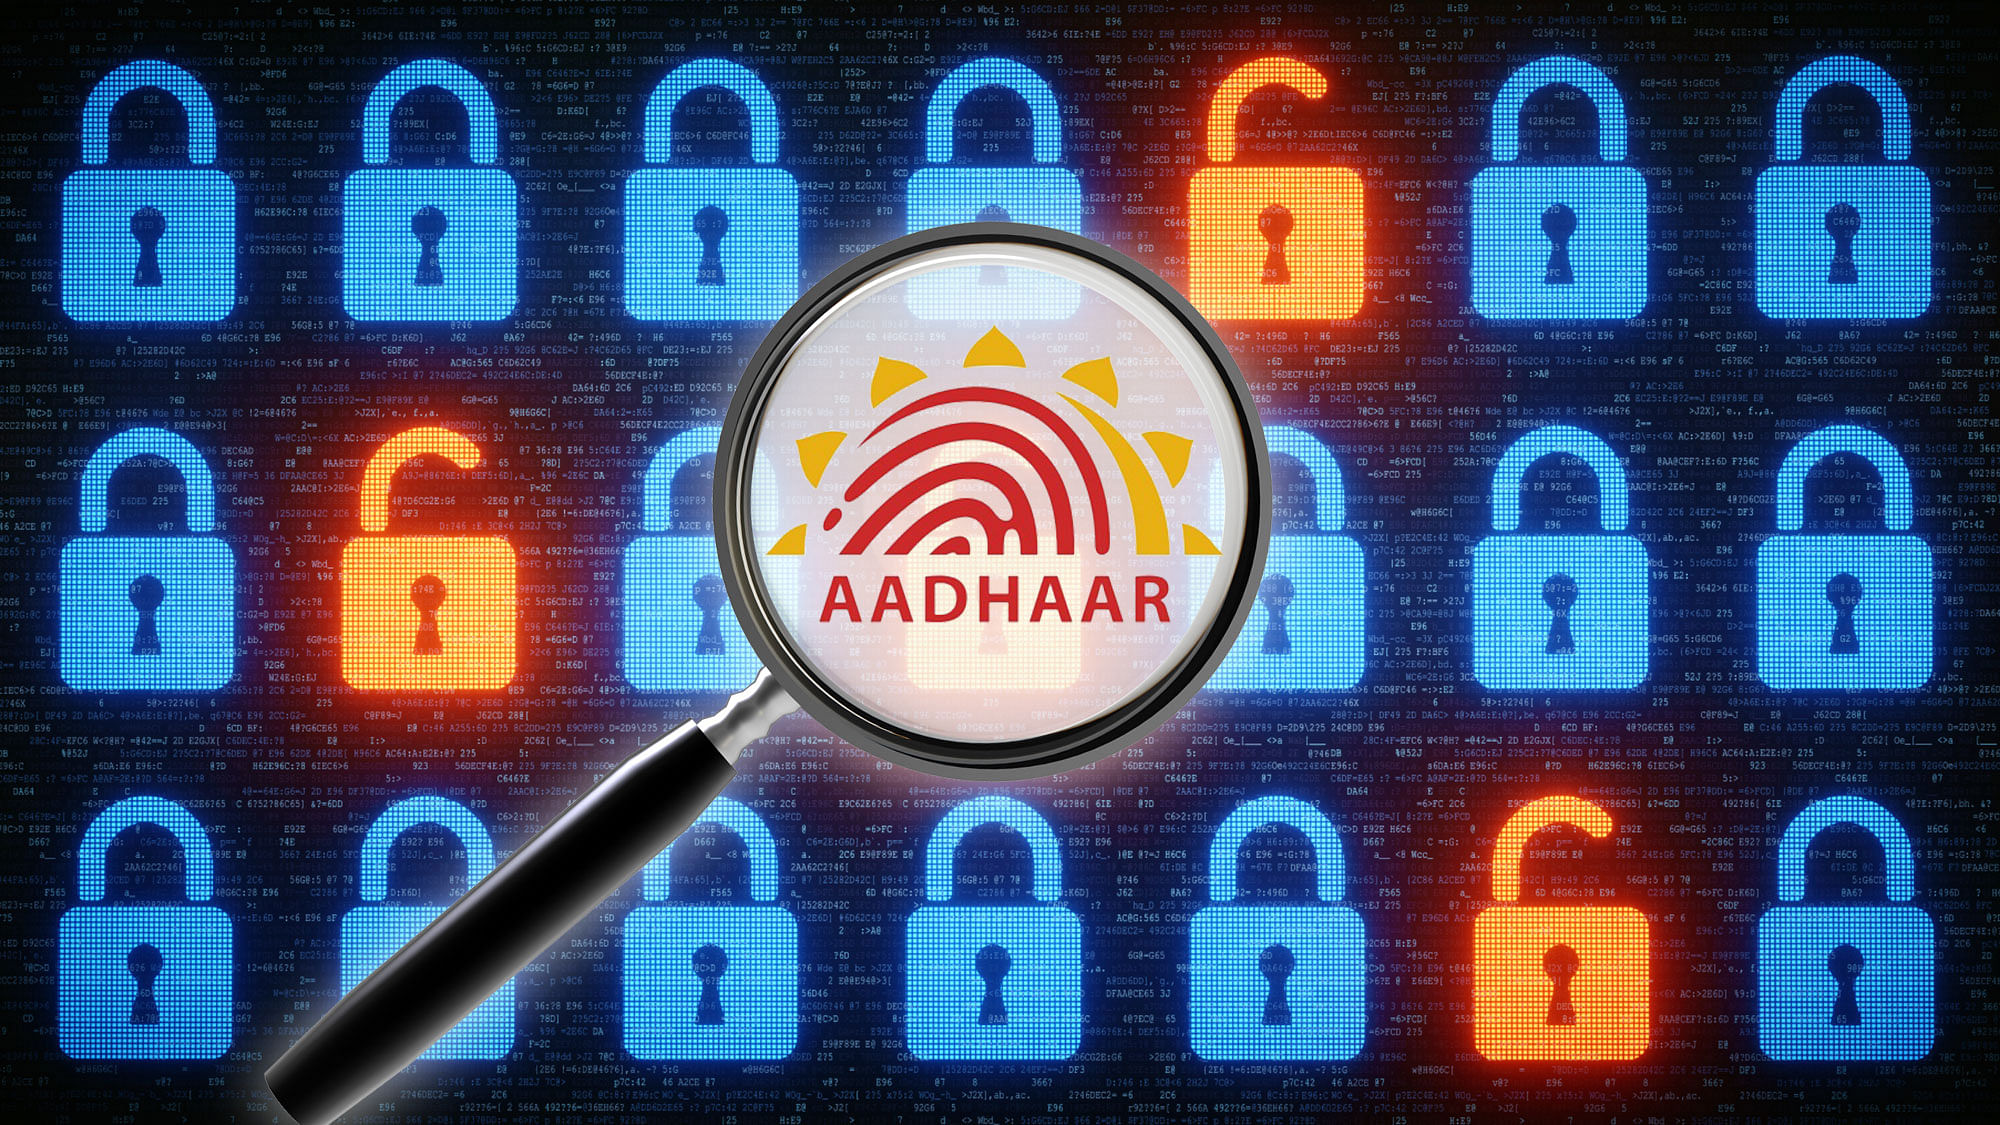 On Wednesday, the Supreme Court heard a plea that challenges the government’s move to make Aadhaar card mandatory. (Photo: iStock)